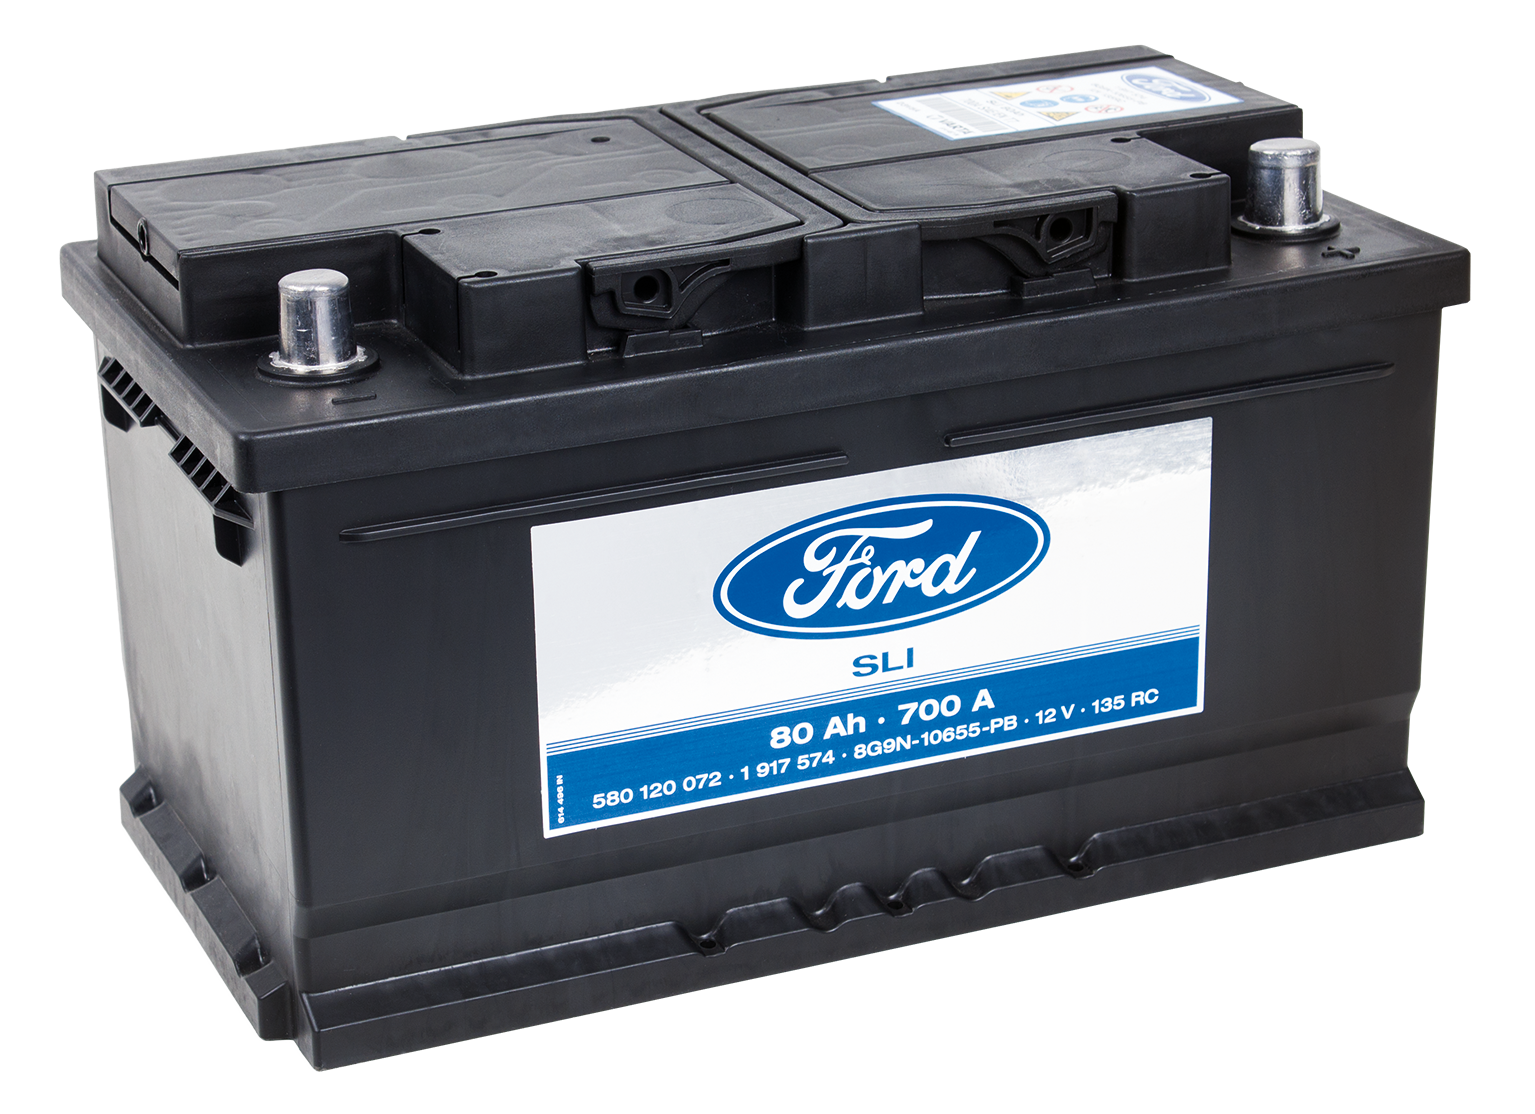 Ford Batteries Image 30480